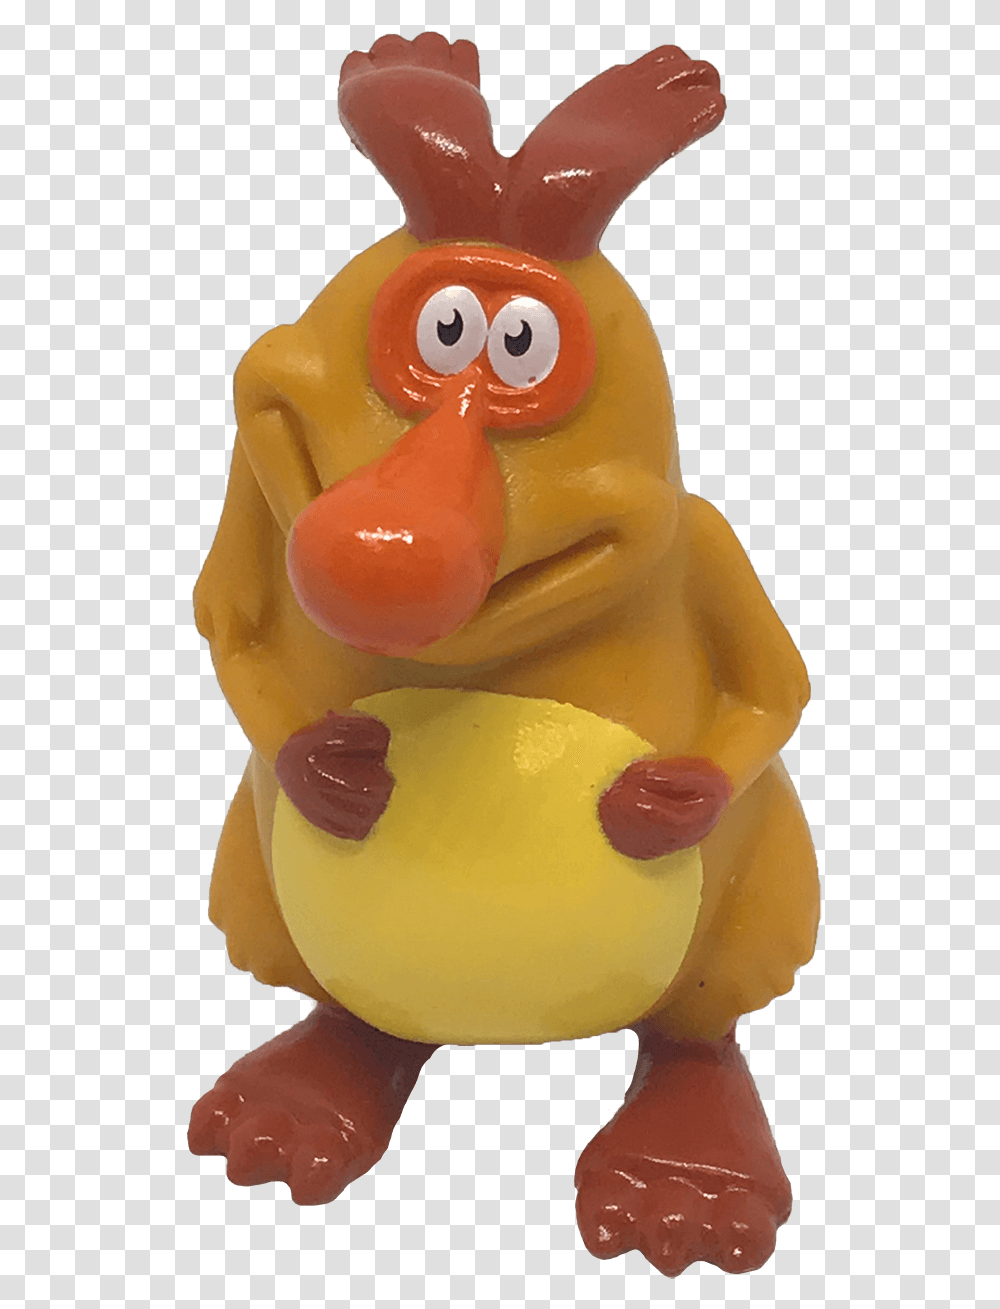 Series 5 Boof Boof Yowie, Toy, PEZ Dispenser, Inflatable, Figurine Transparent Png